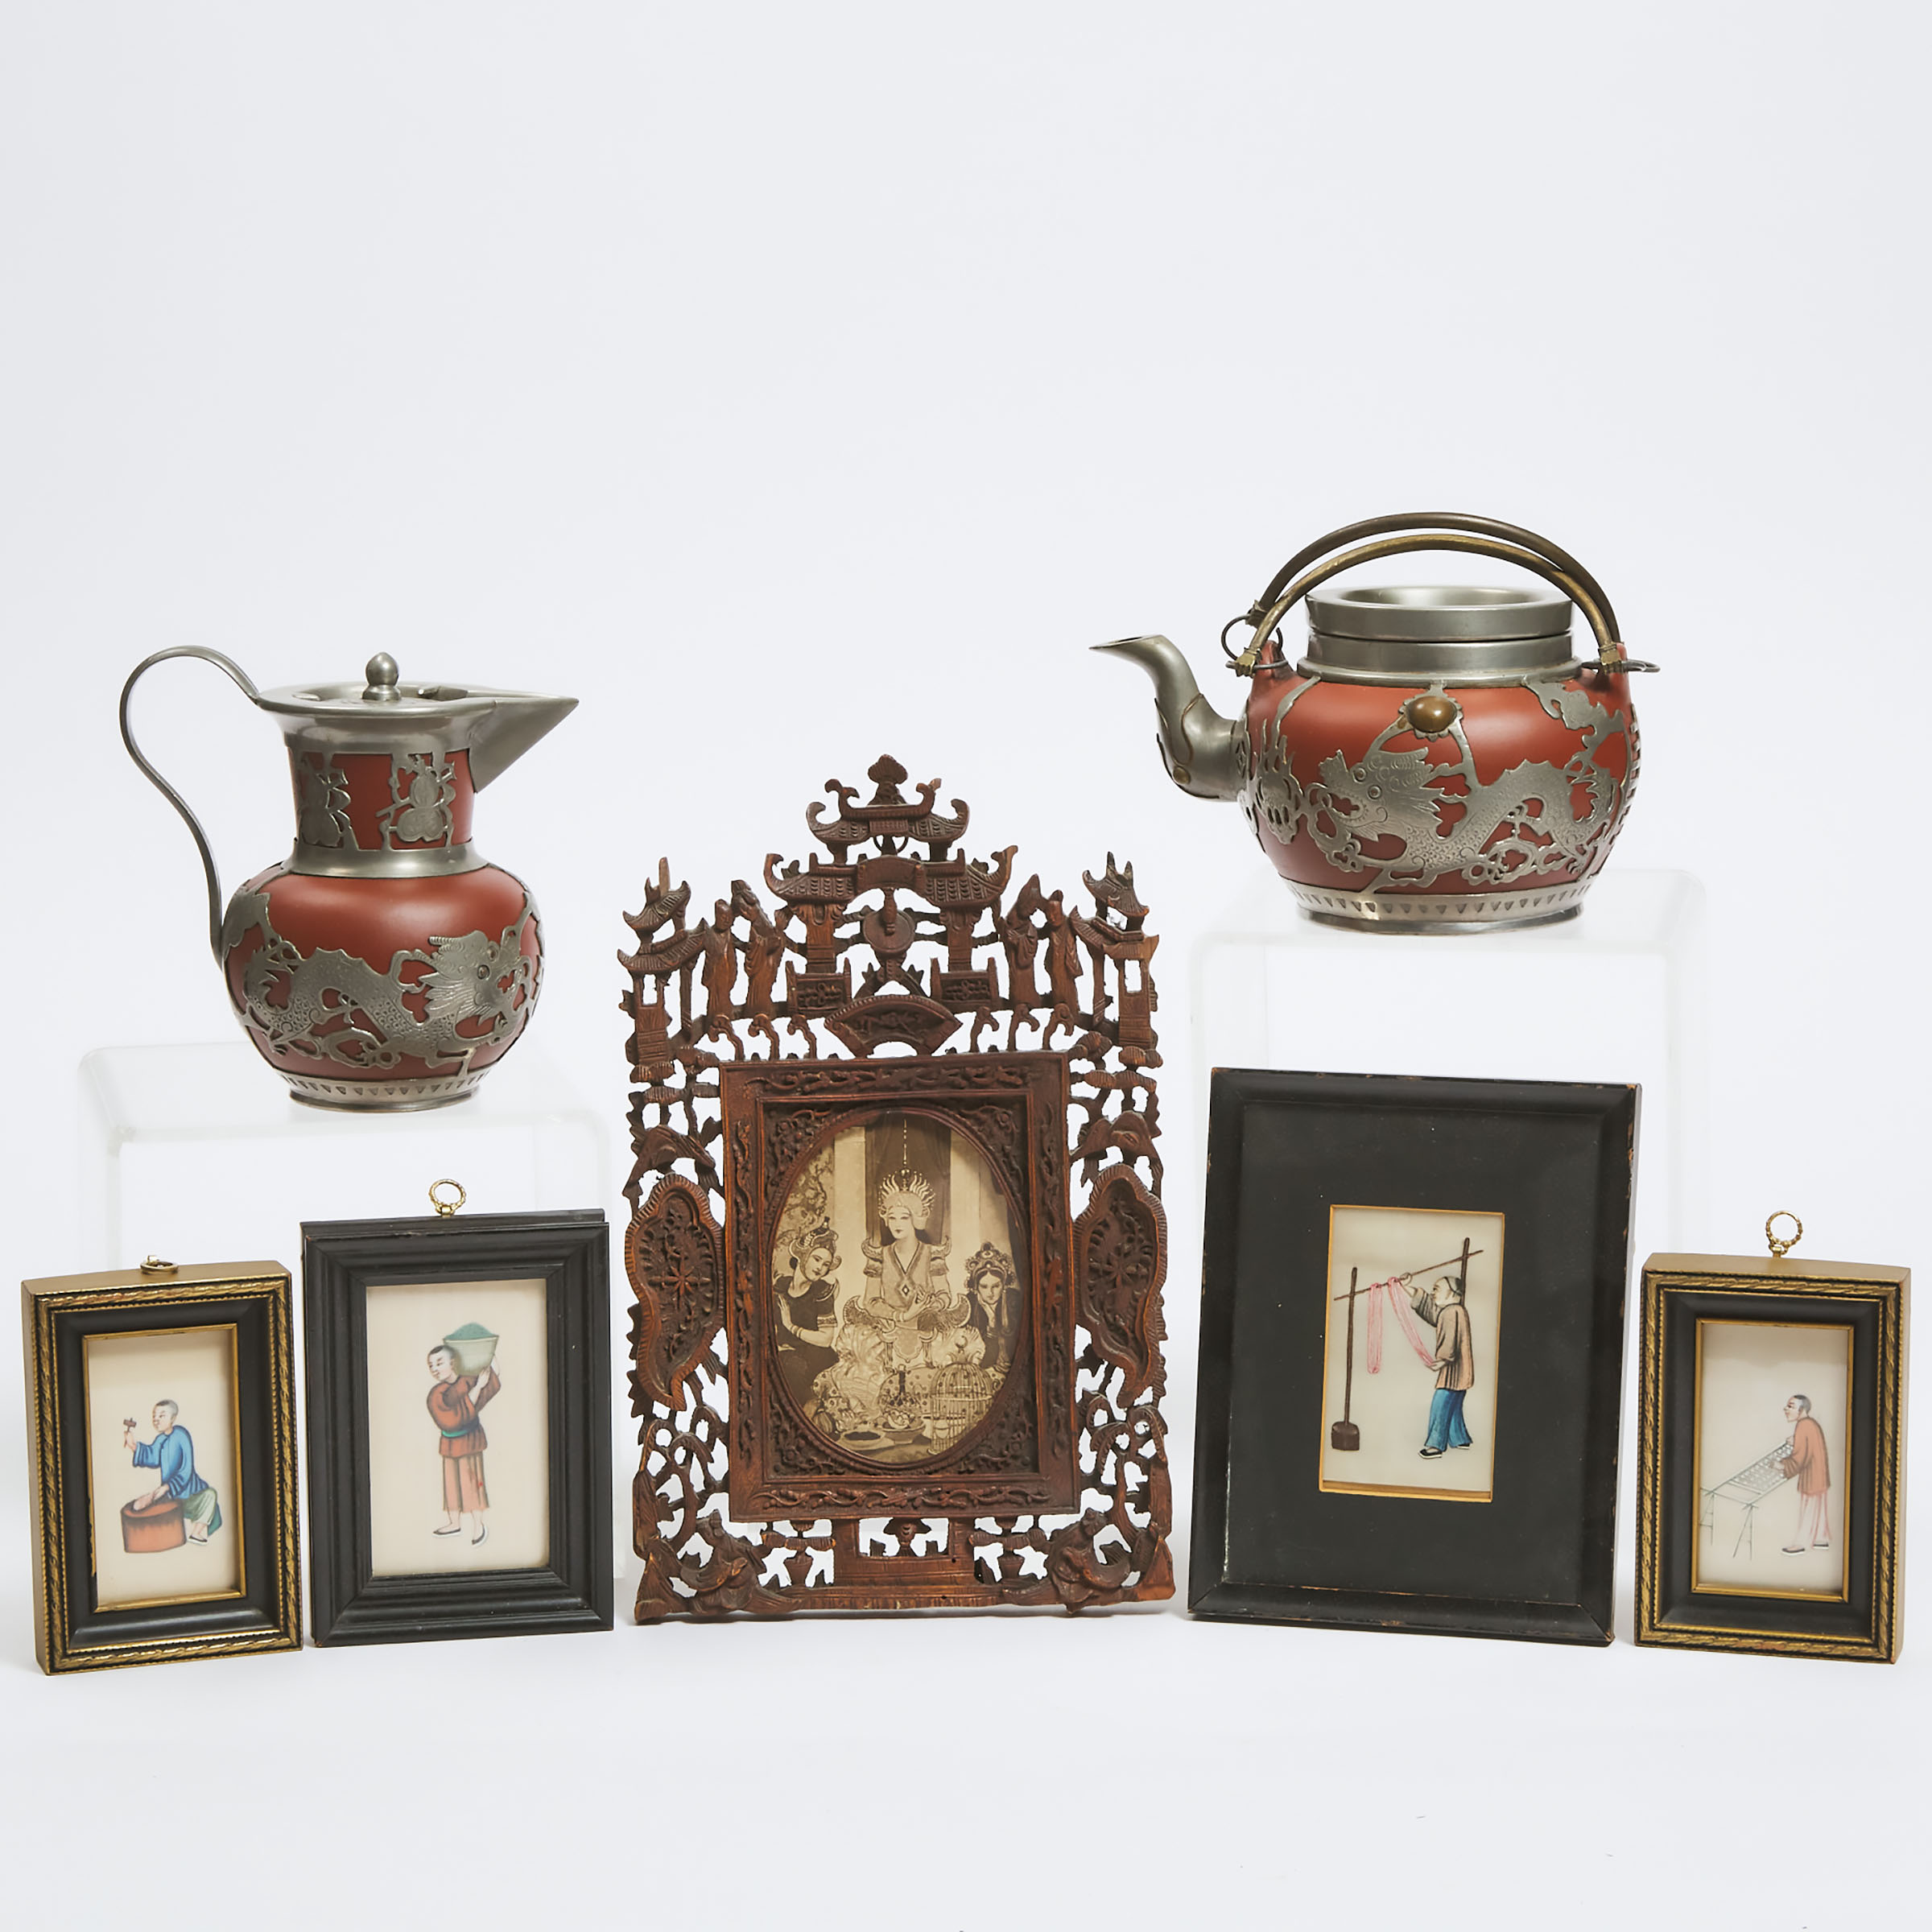 Four Chinese Pith Paintings, Together With Two Metal-Mounted Yixing Teapots and a Carved Wood Frame